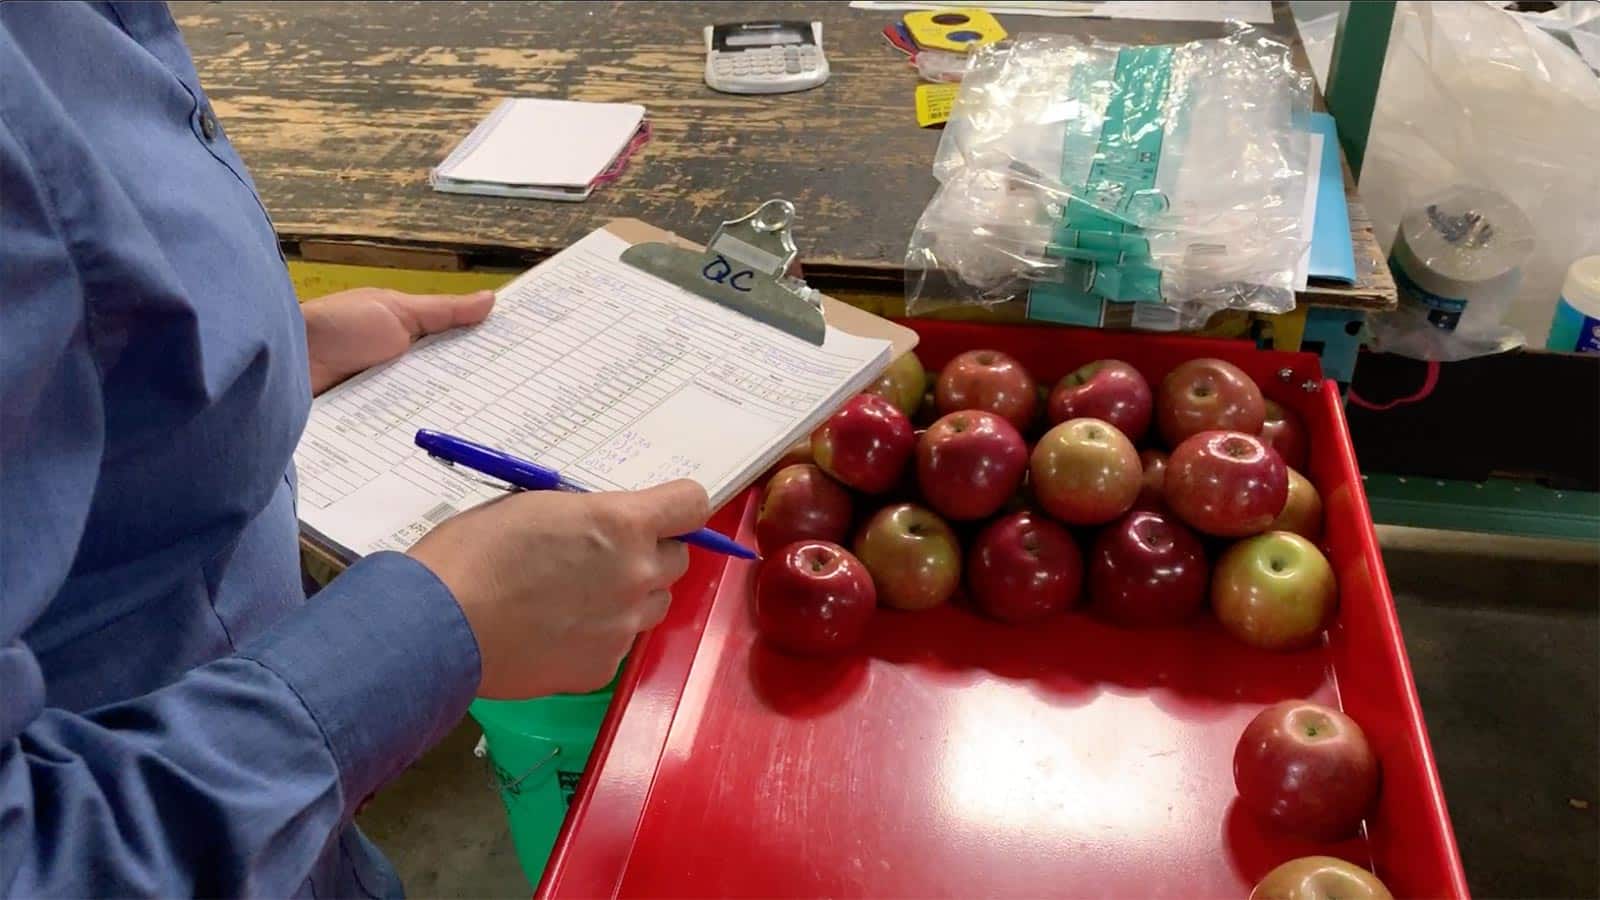 A quality control inspector reviews apples in a packing facility.